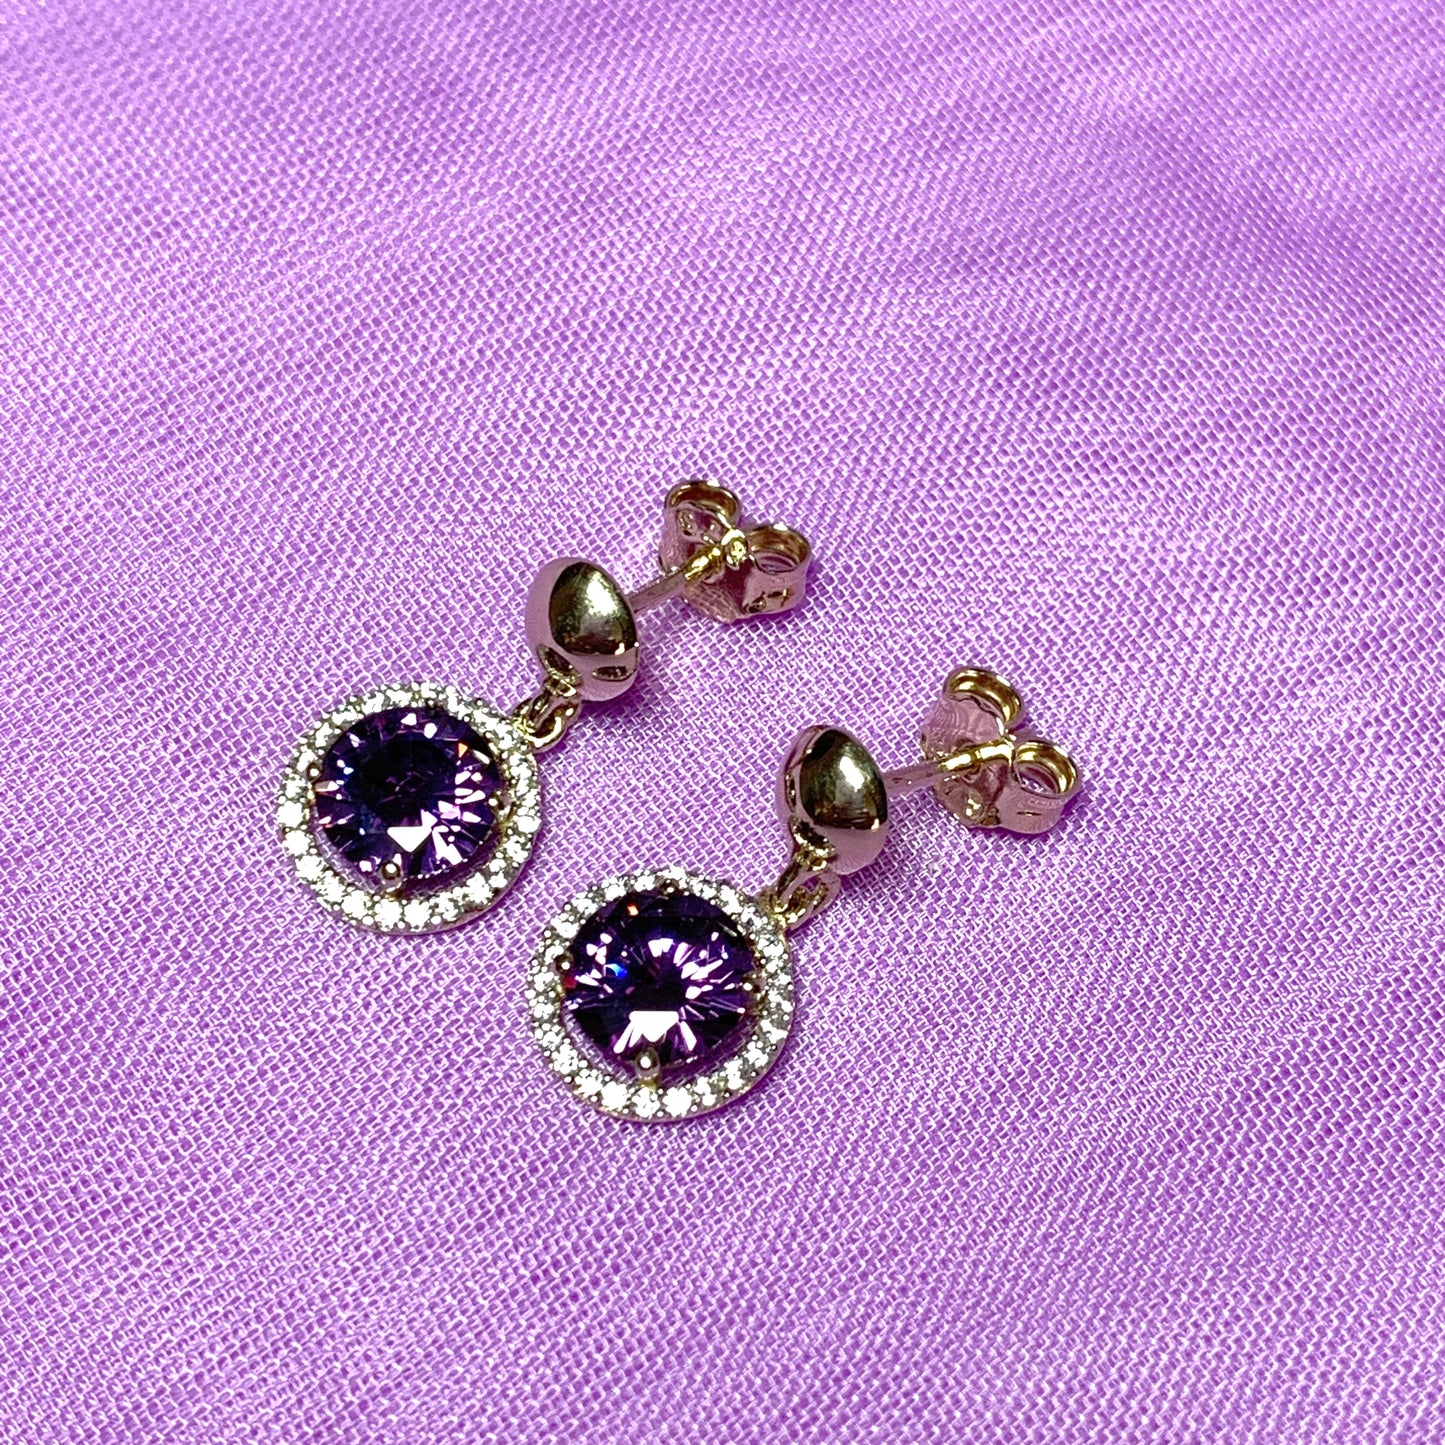 Round yellow gold and amethyst and cubic zirconia drop earrings